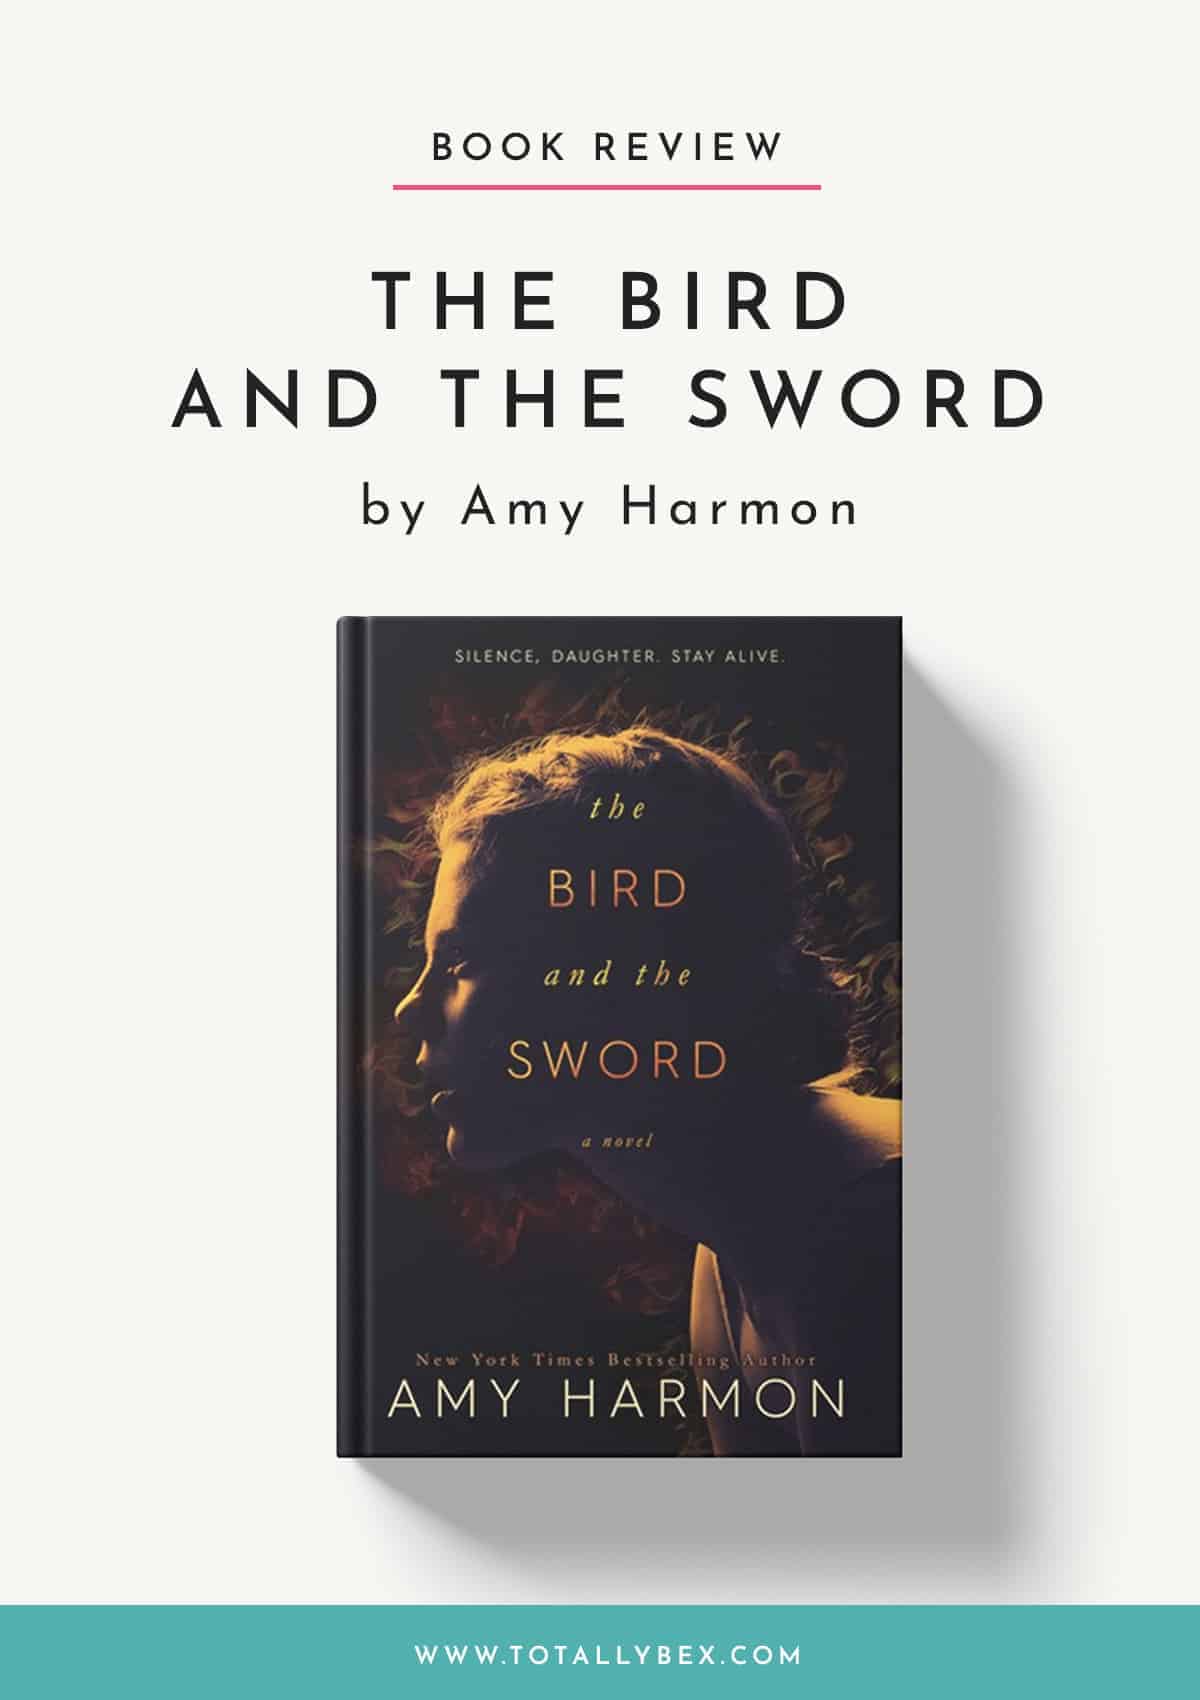 The Bird and the Sword by Amy Harmon-Book Review